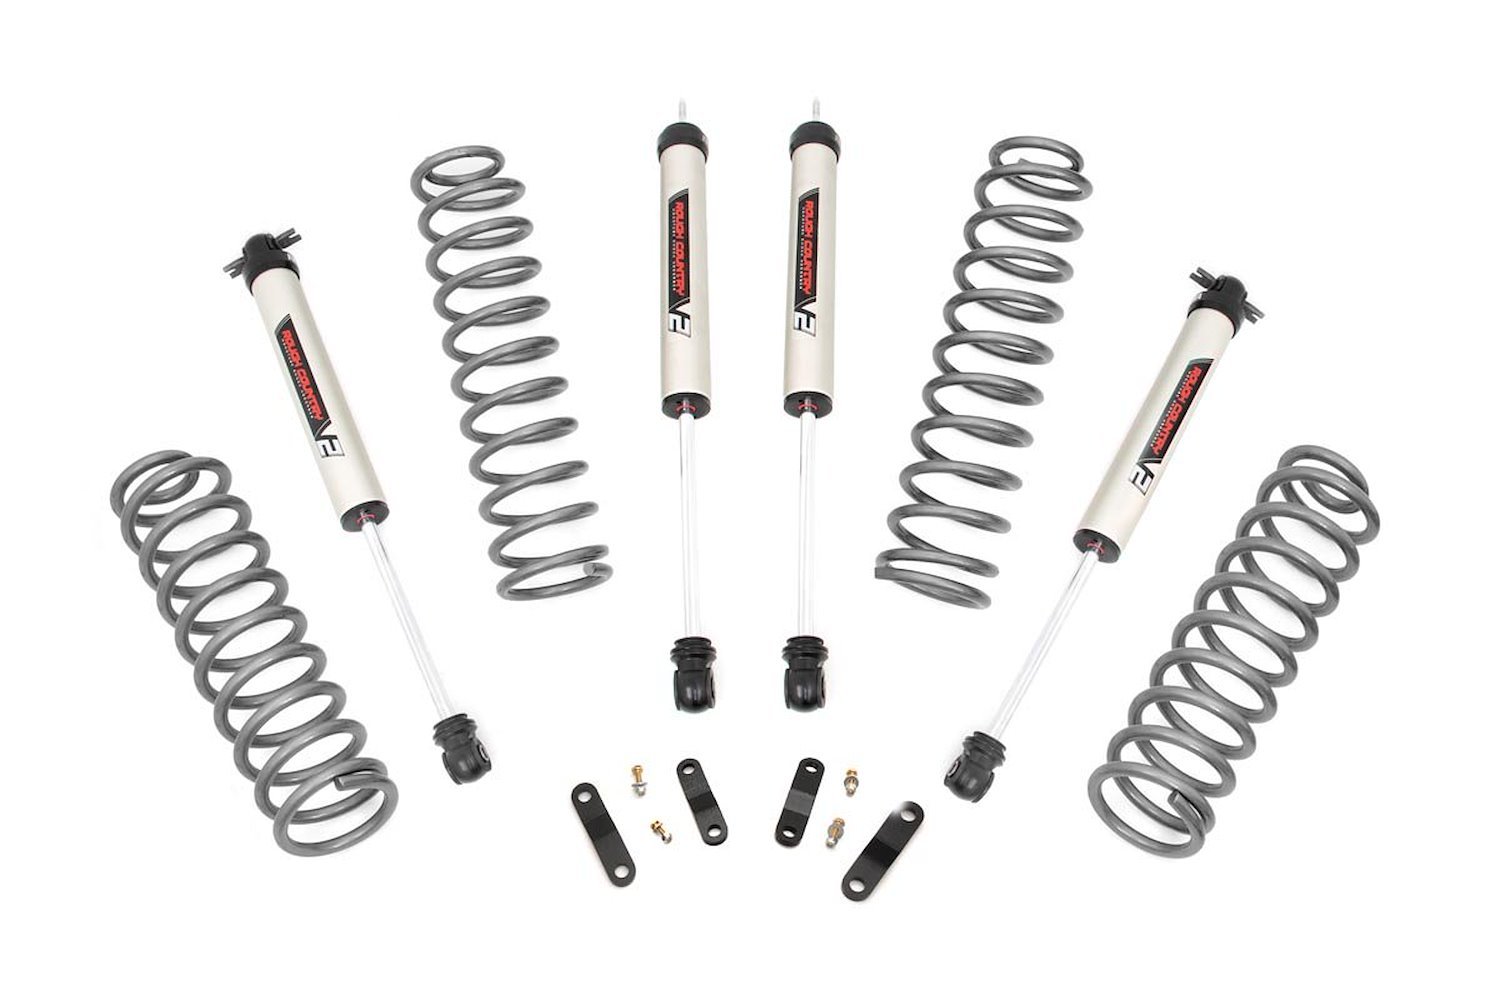 67970 Front and Rear Suspension Lift Kit, Lift Amount: 2.5 in. Front/2.5 in. Rear